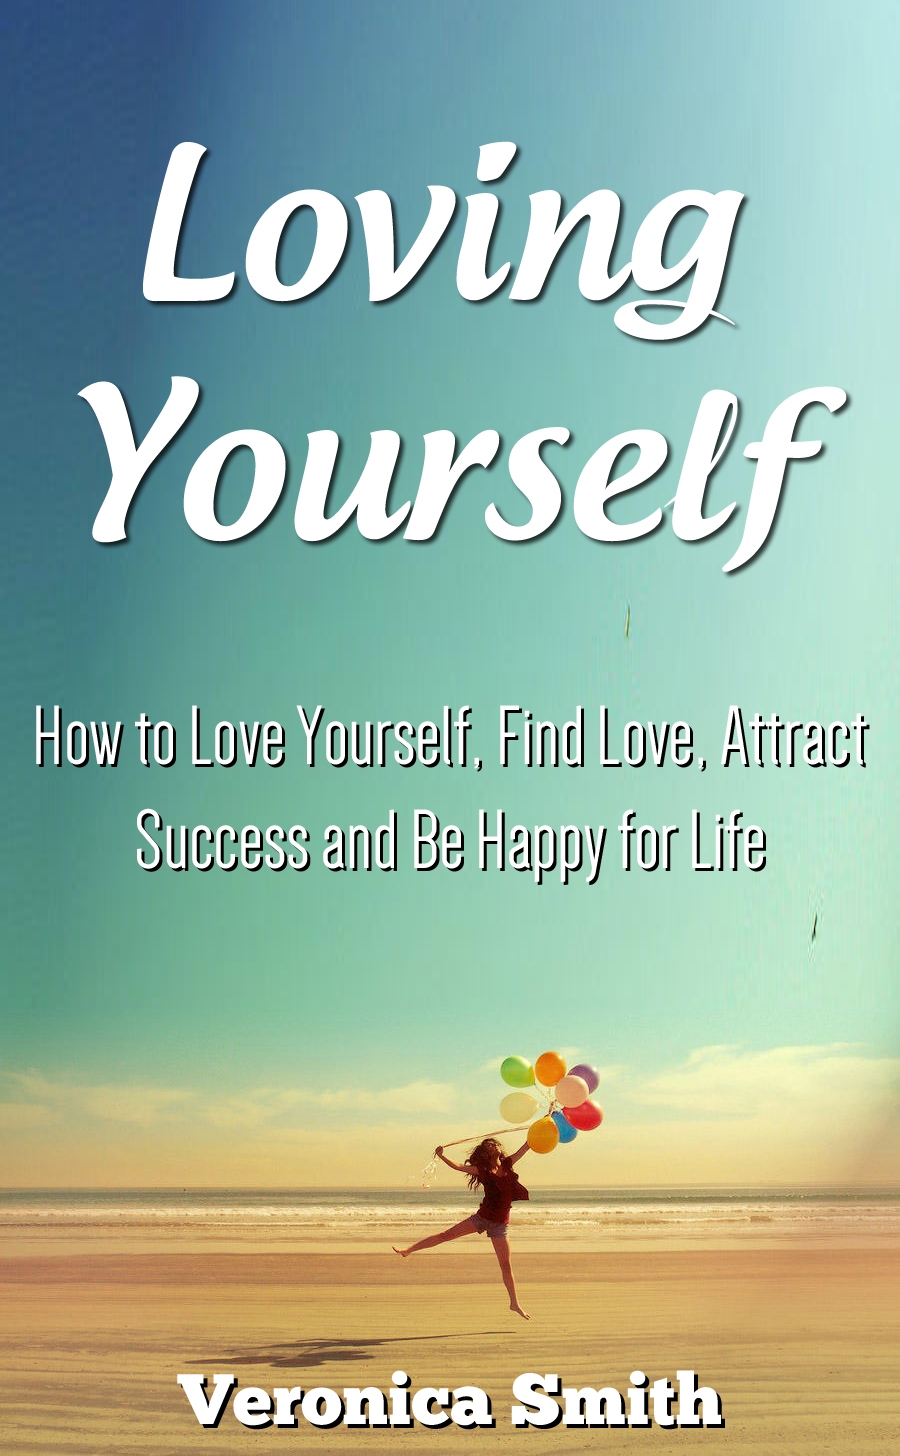 FREE: Loving Yourself: How to Love Yourself, Find Love, Attract Success and Be Happy for Life by Veronica Smith